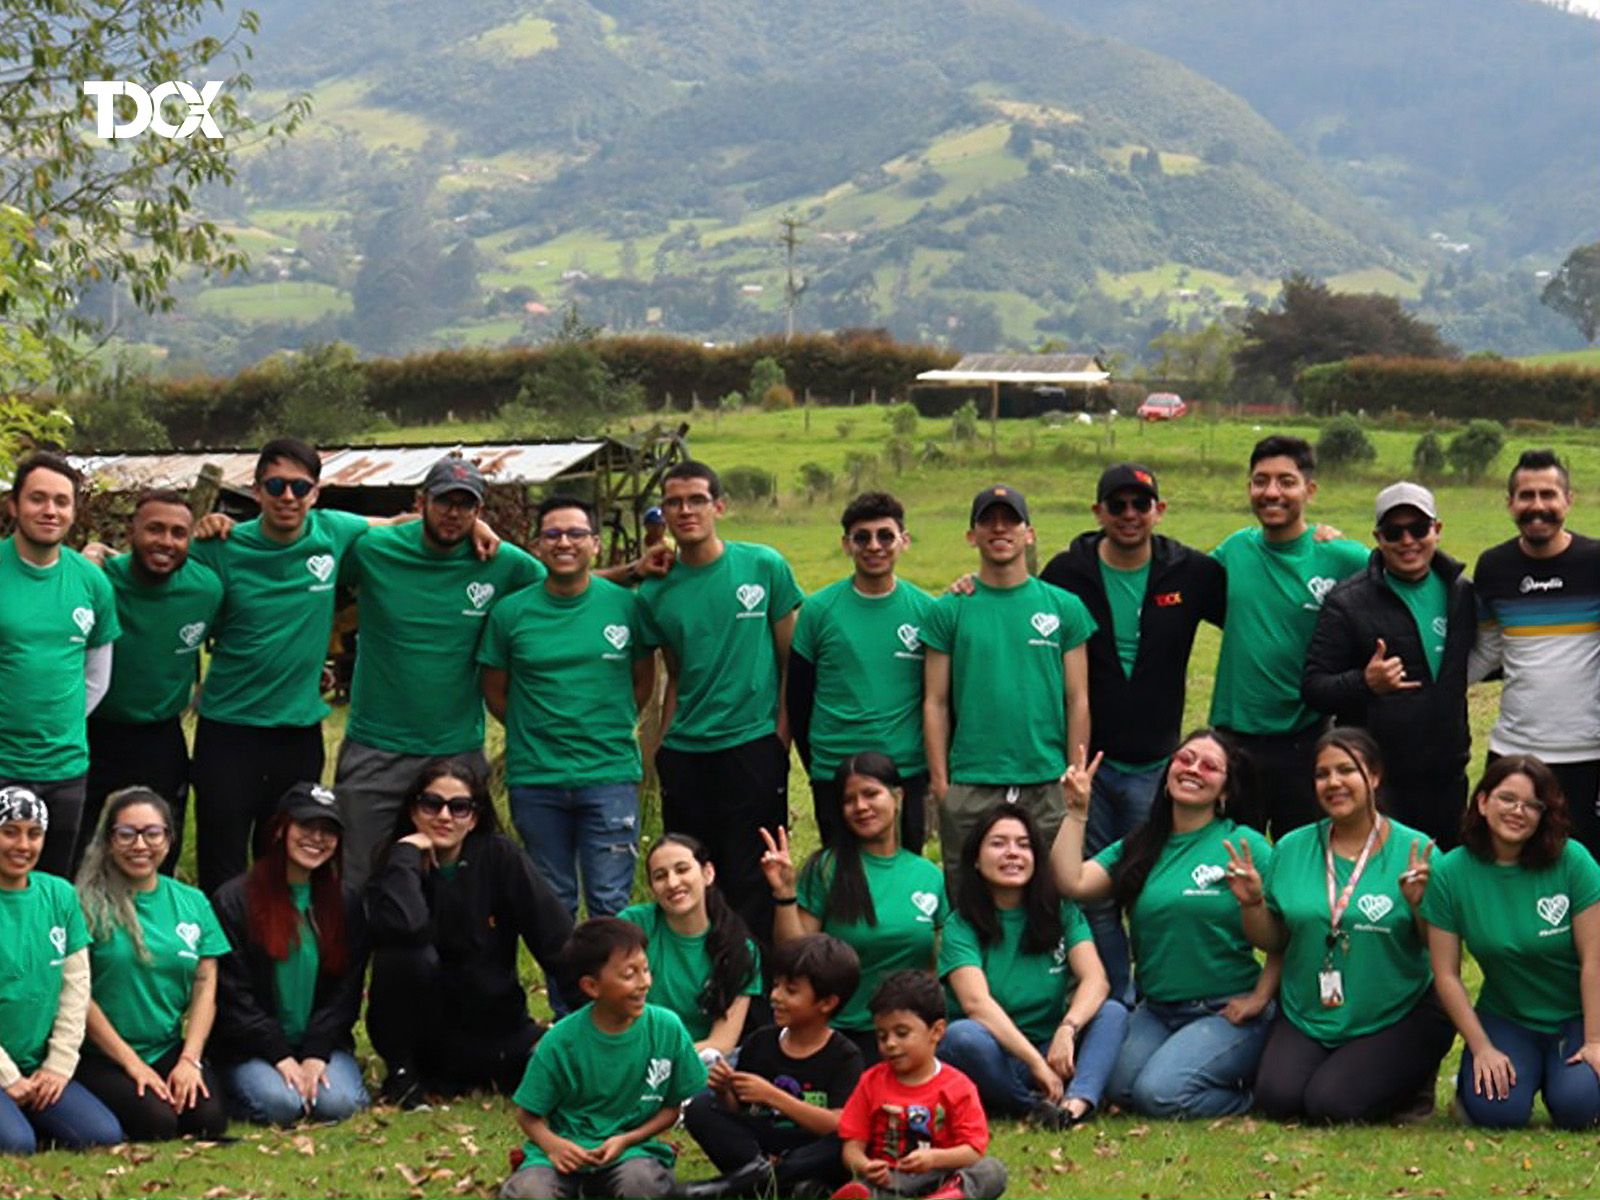 Colombia - Twenty-two (22) TDpeeps at TDCX Colombia took a moment to reconnect with nature and contribute to environmental conservation through a tree planting event at Vereda el Triunfo, La Calera Cundinamarca. 